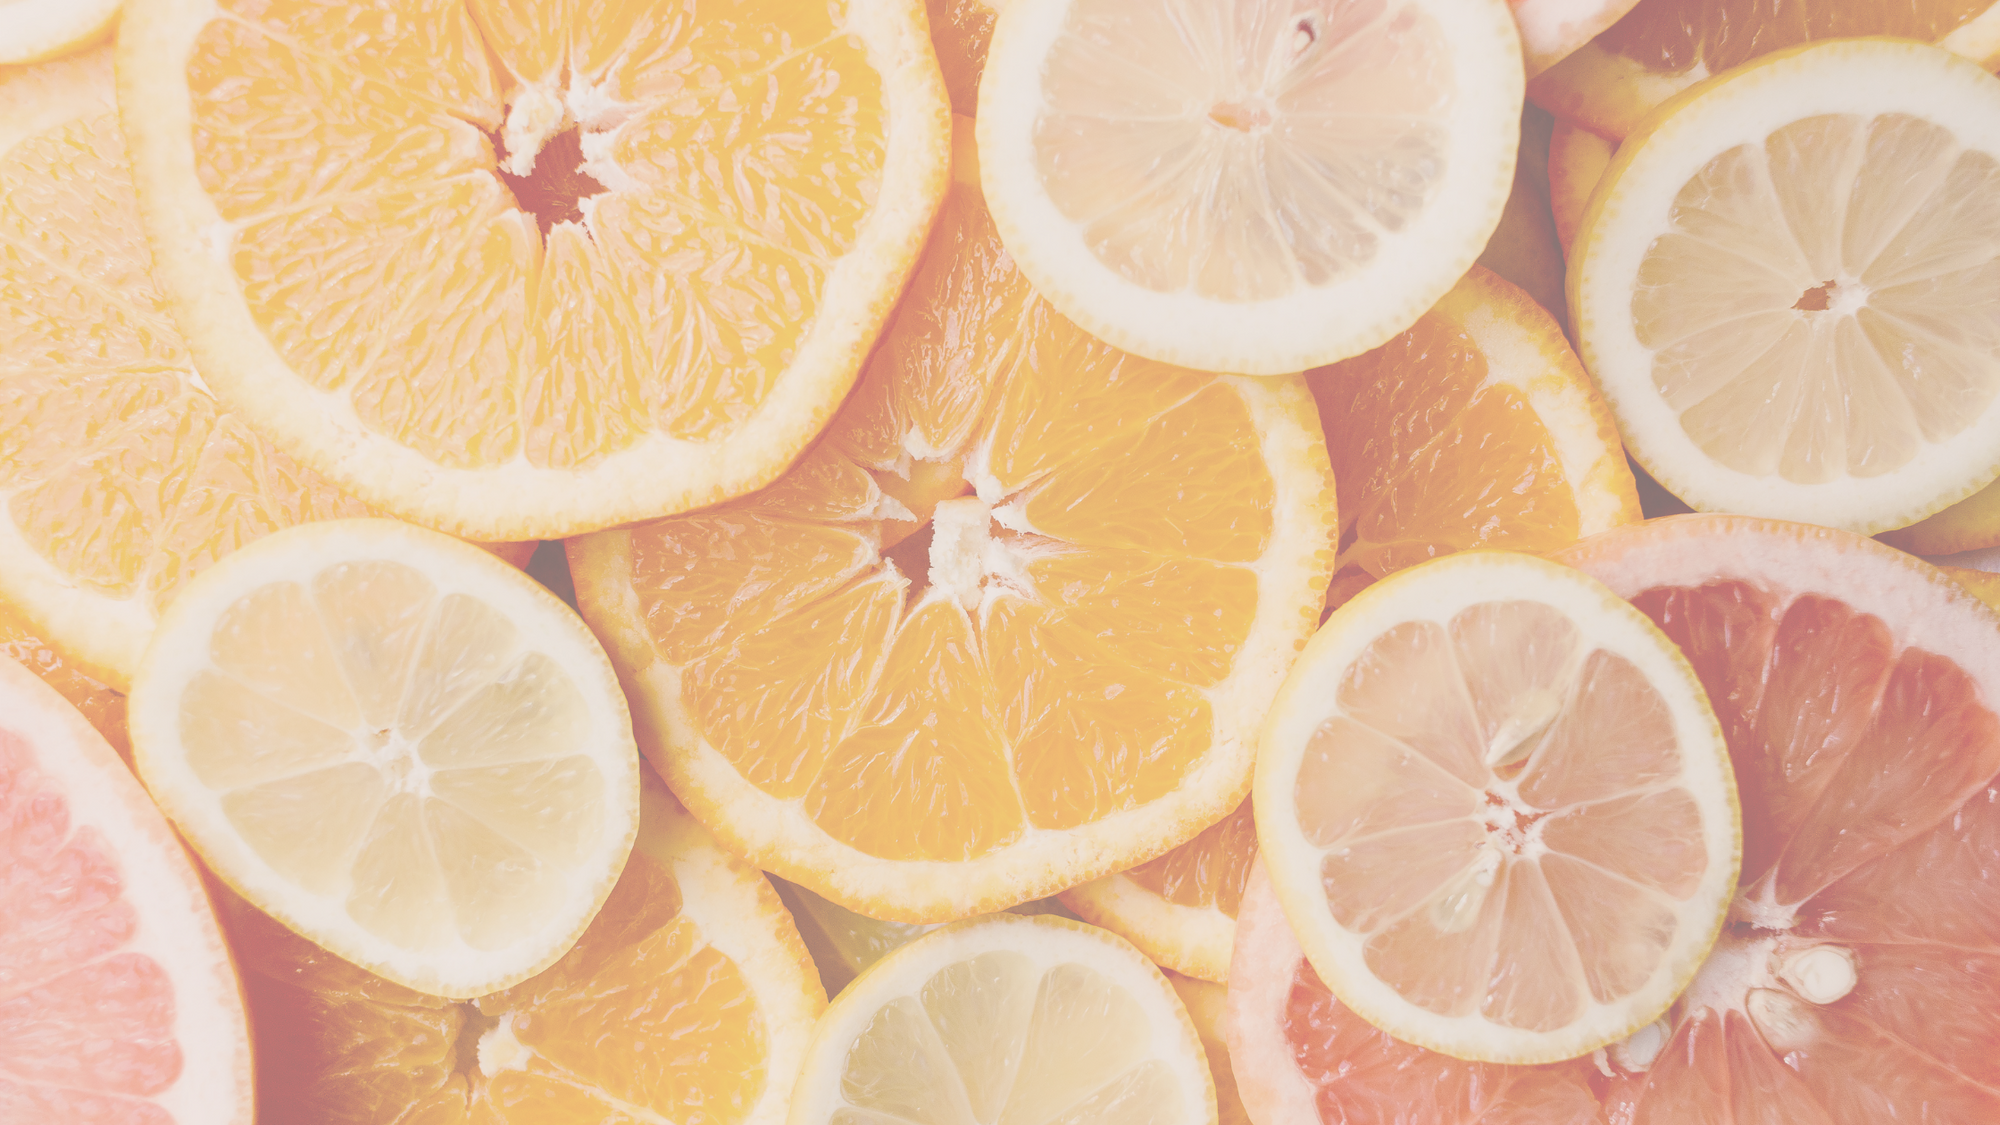 The 7 incredible benefits of vitamin C